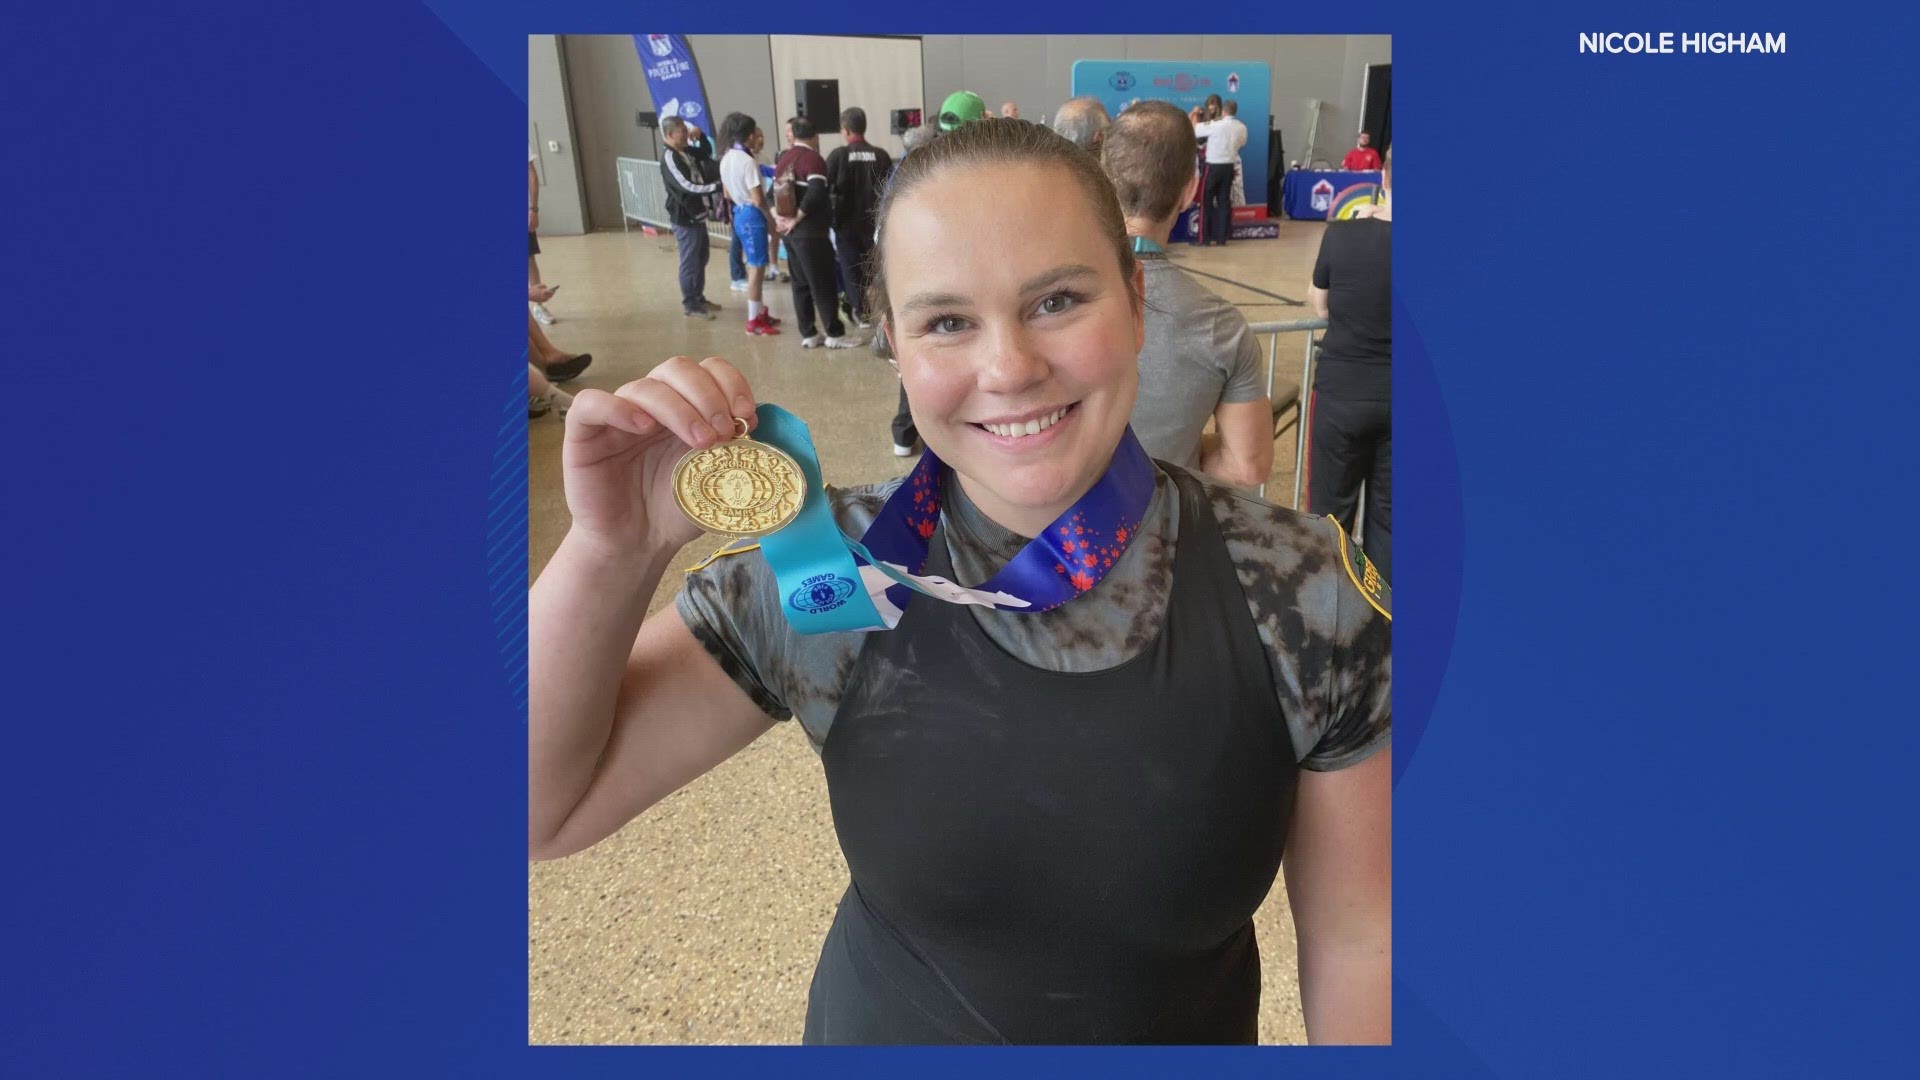 Greenfield Police Patrolman Nicole Higham set two world records en route to a gold medal at the World Police & Fire Games in Winnipeg.